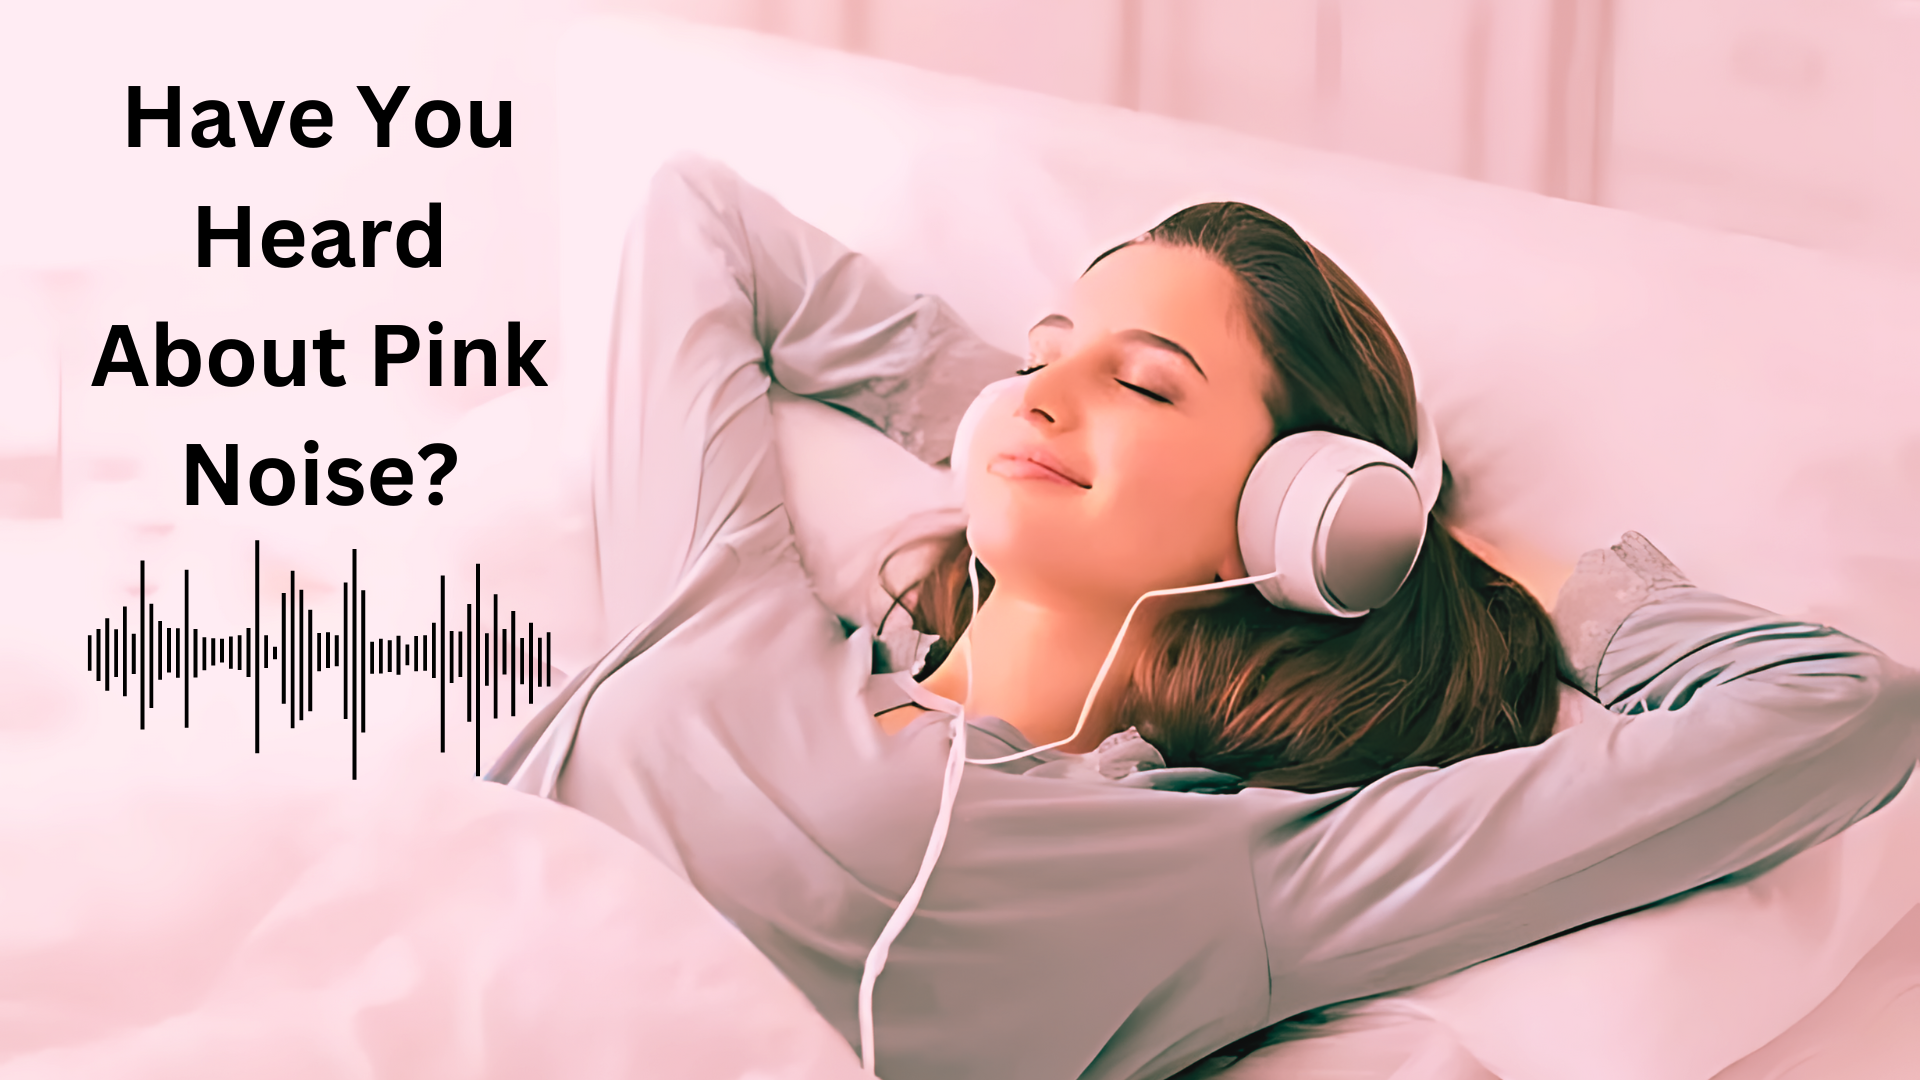 Have You Heard About Pink Noise? Early Research Suggests It Might Enhance Sleep And Memory